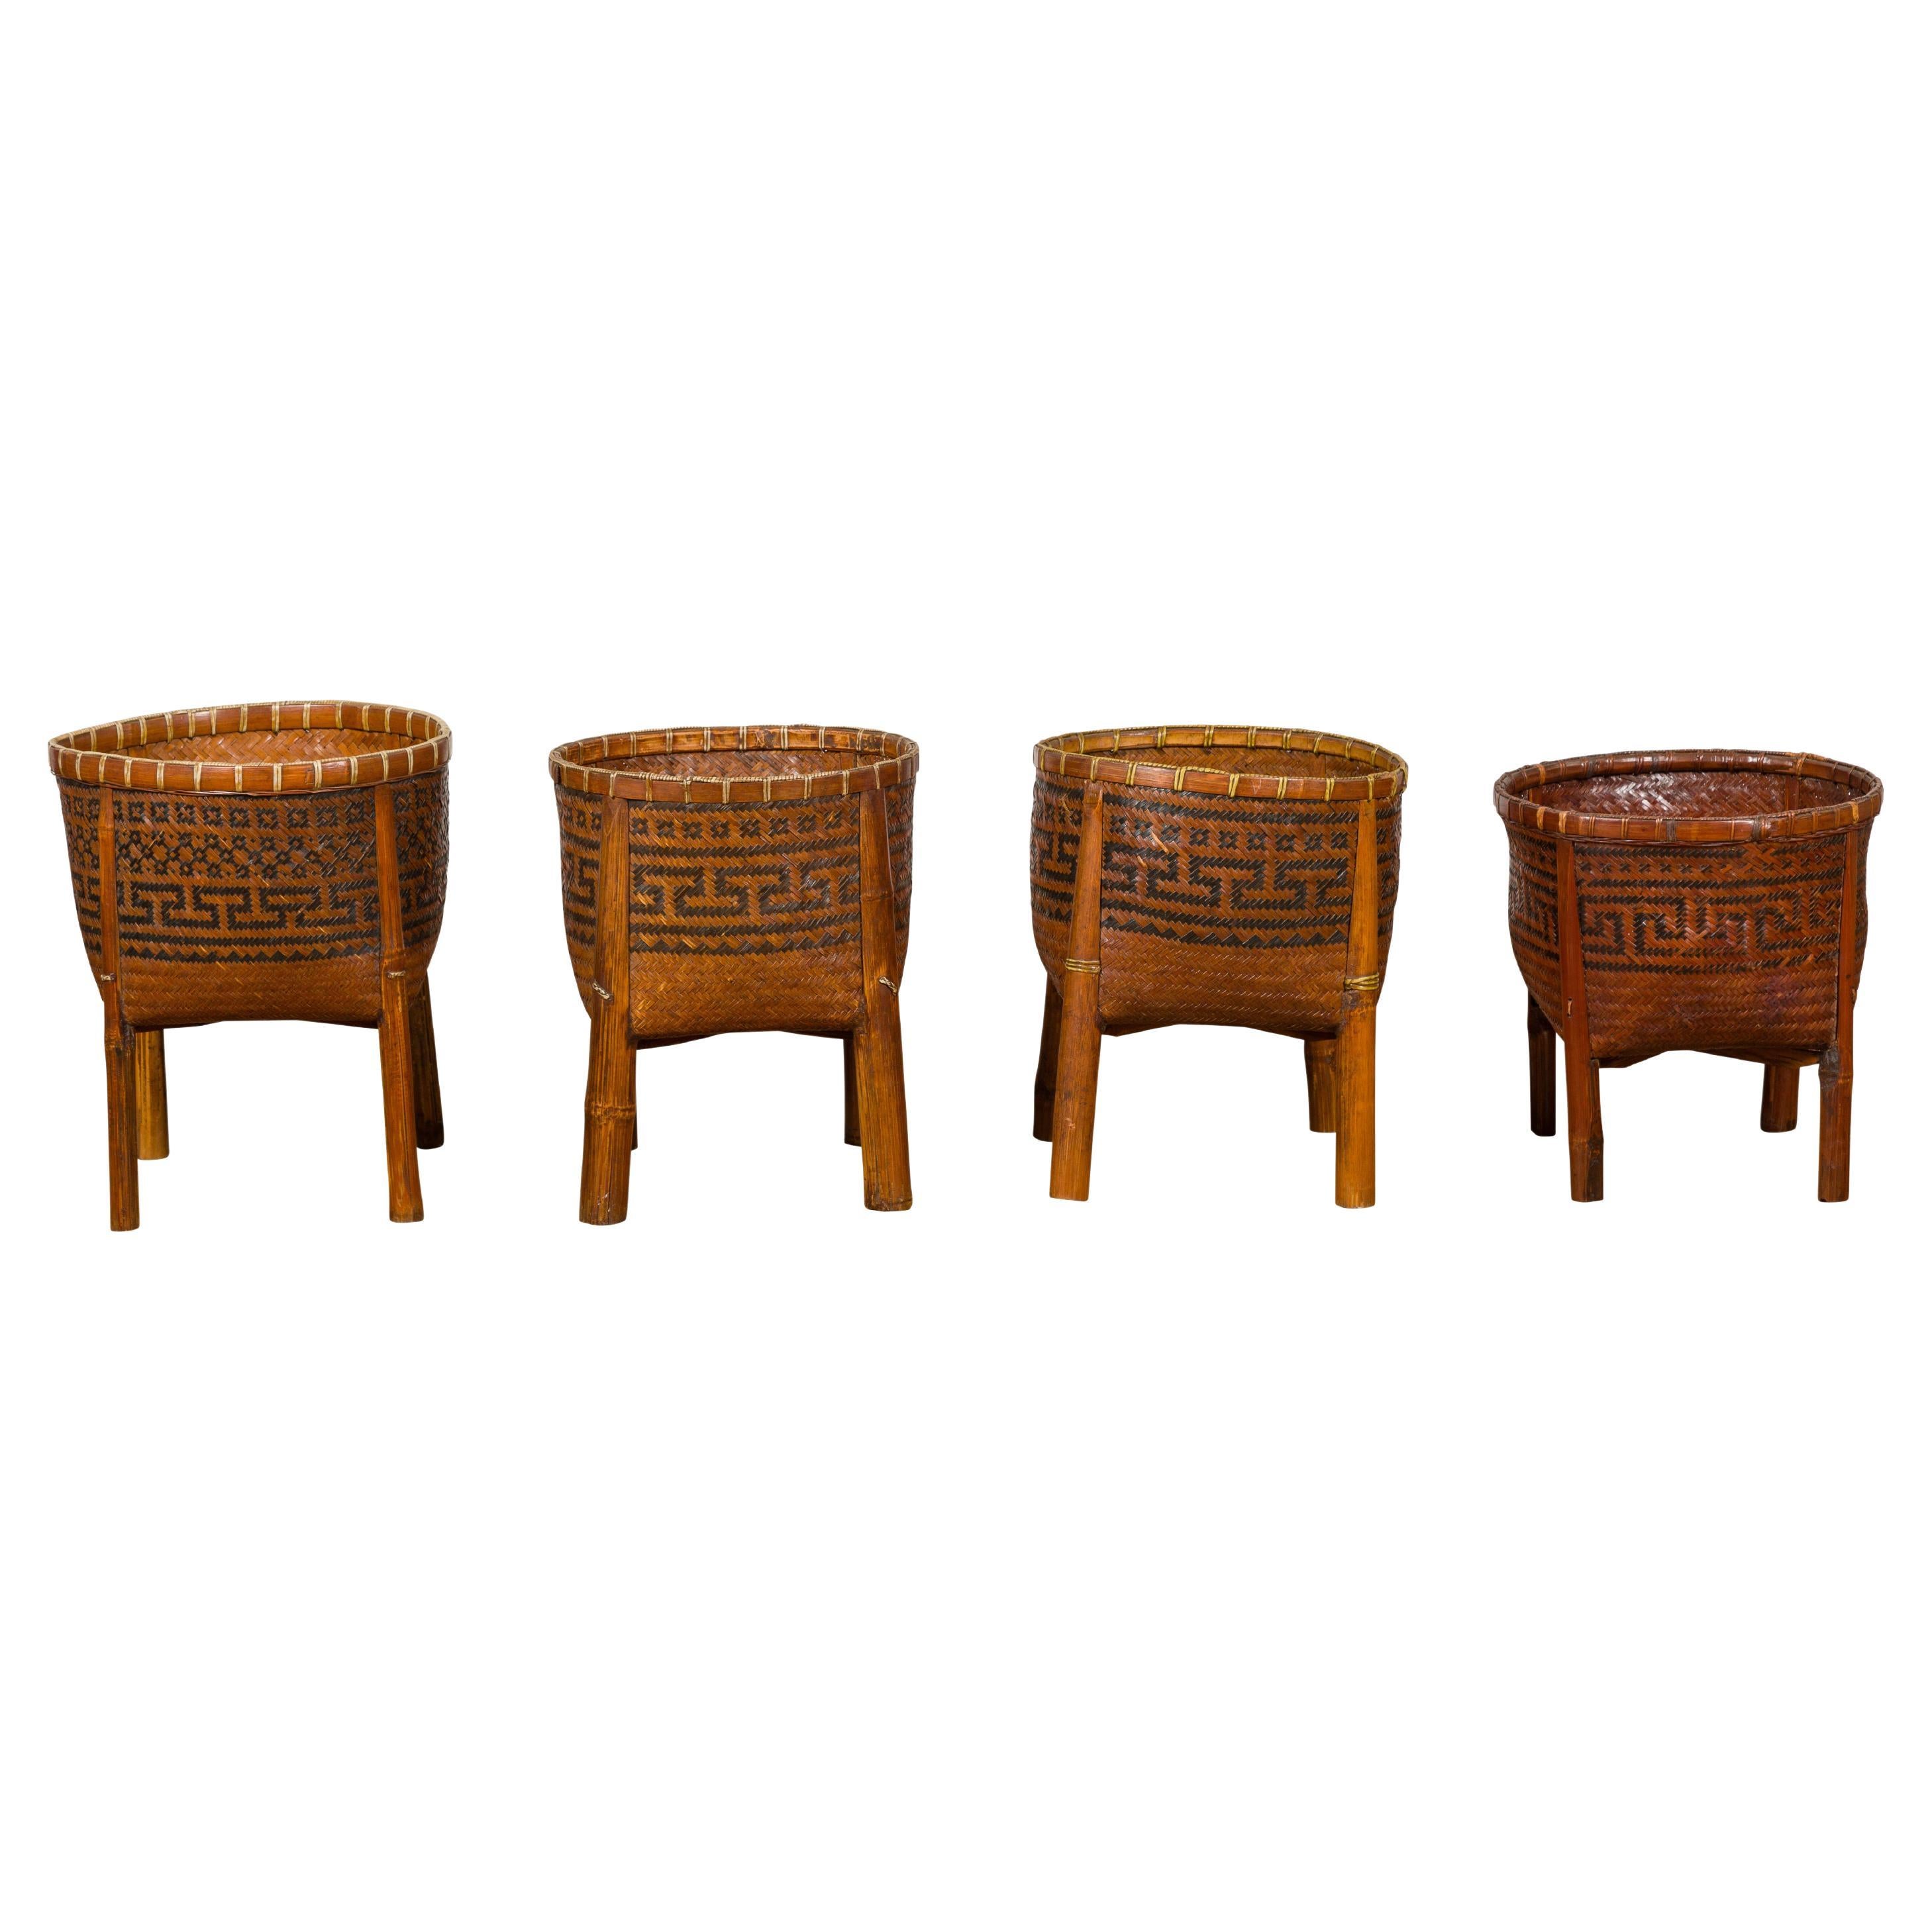 Woven Rattan Baskets on Legs with Greek Key Motifs, Four Pieces Sold Each